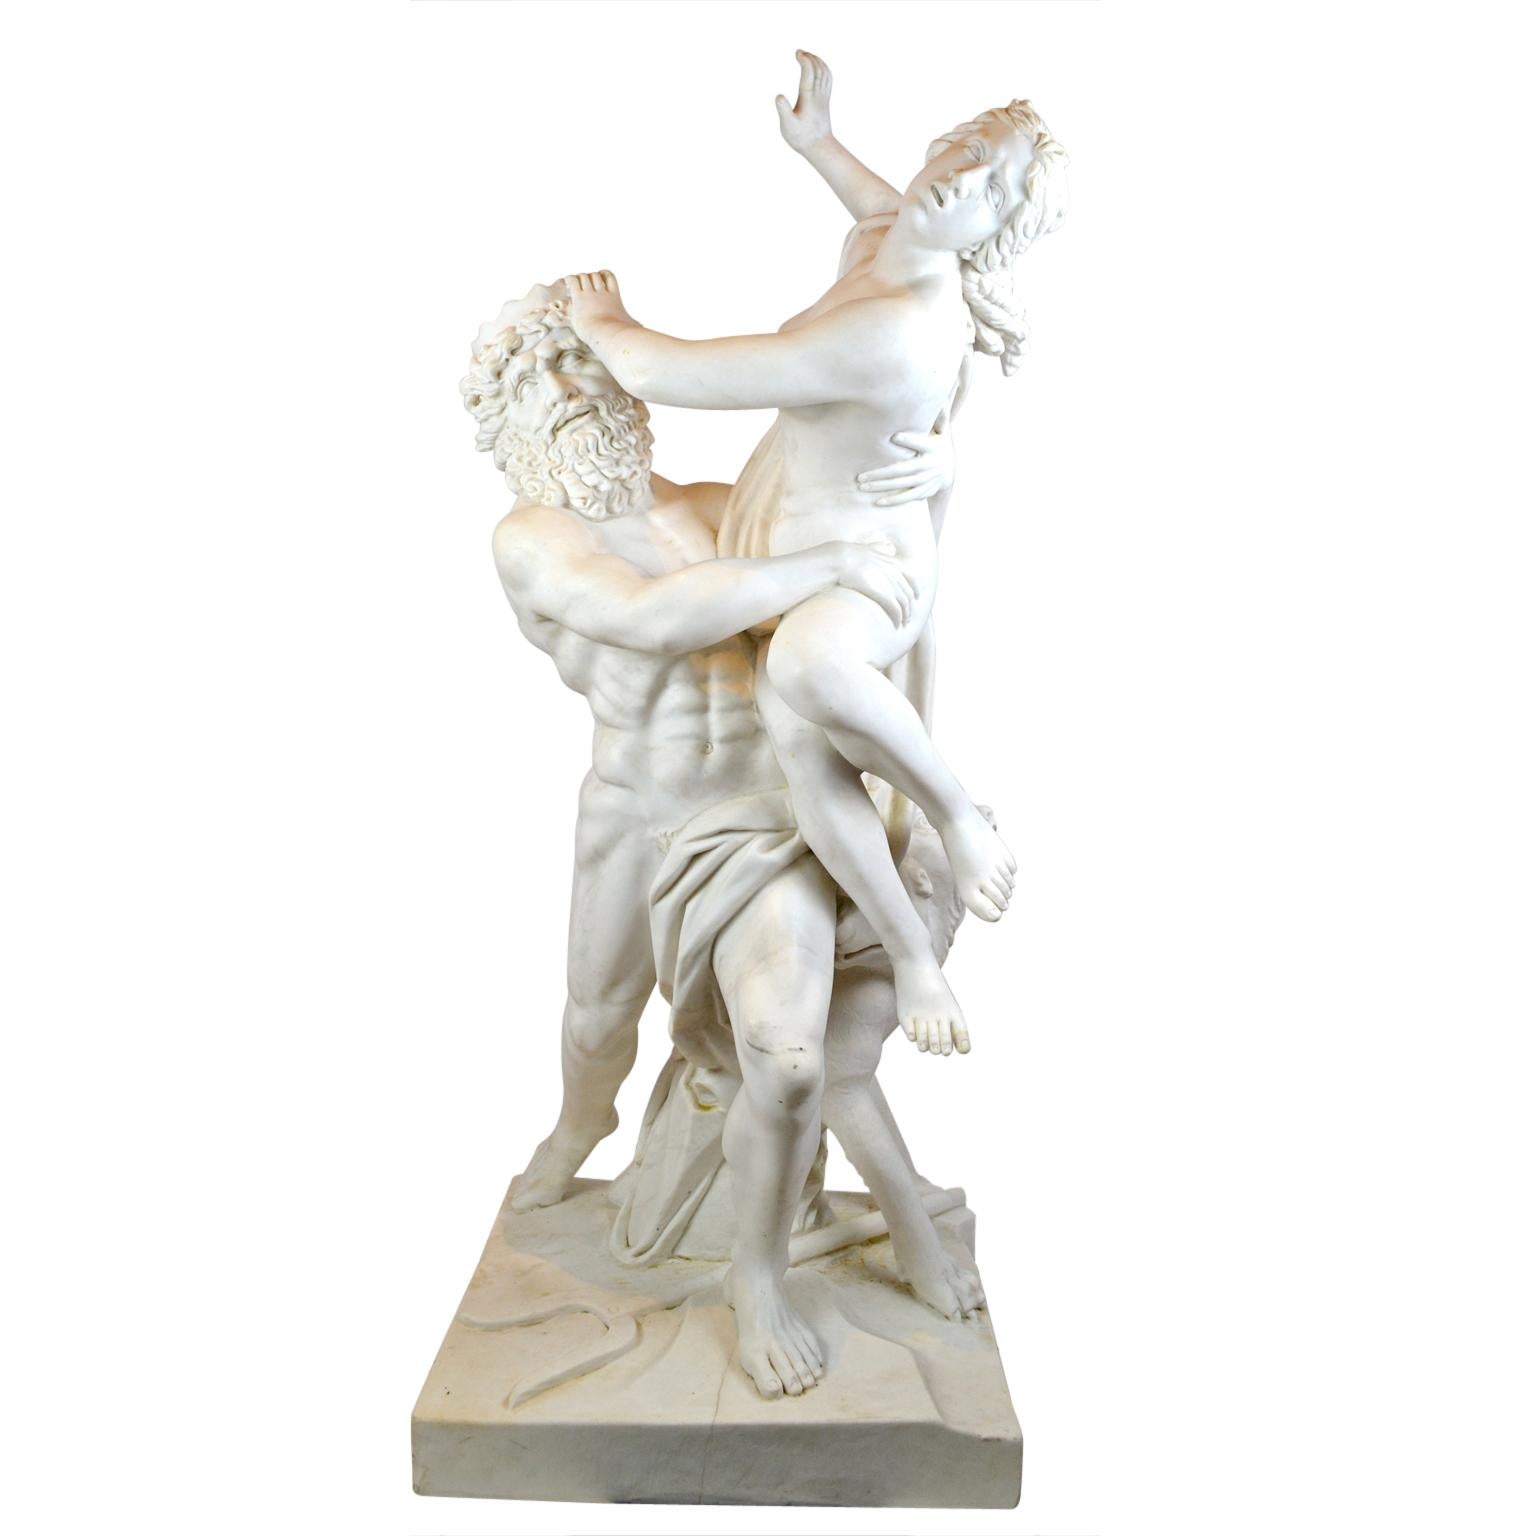 Neoclassical Revival 19 Century Marble Statue of the Rape of Prosperina After Bernini by Fabi Altini For Sale